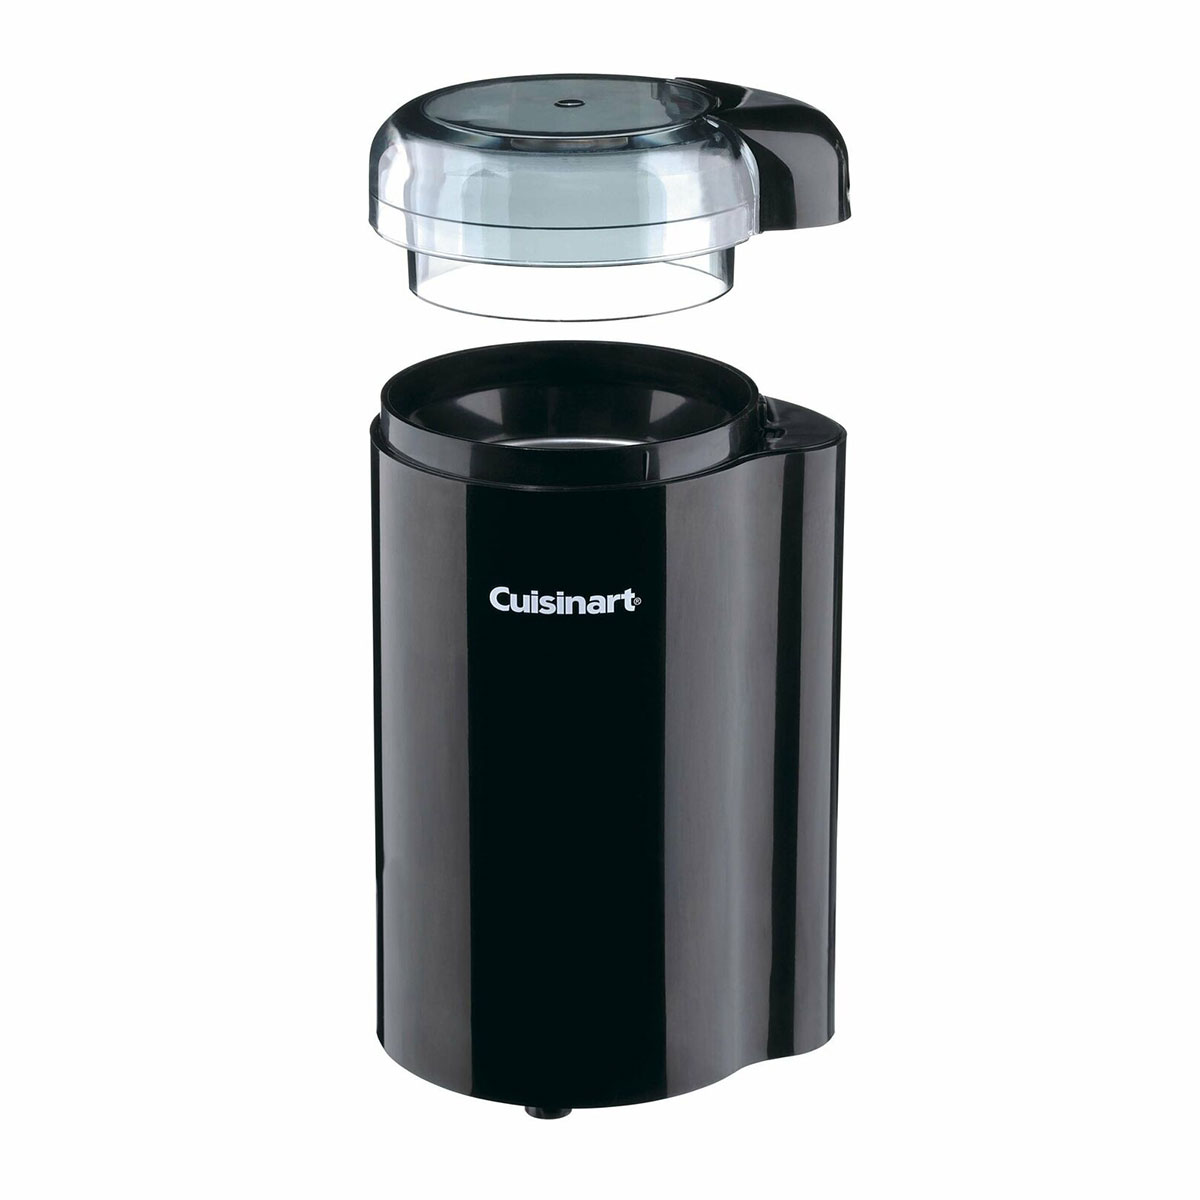 Cuisinart DCG-20N Coffee Bar Coffee Grinder, White Bundle with 1 Year Extended Protection Plan